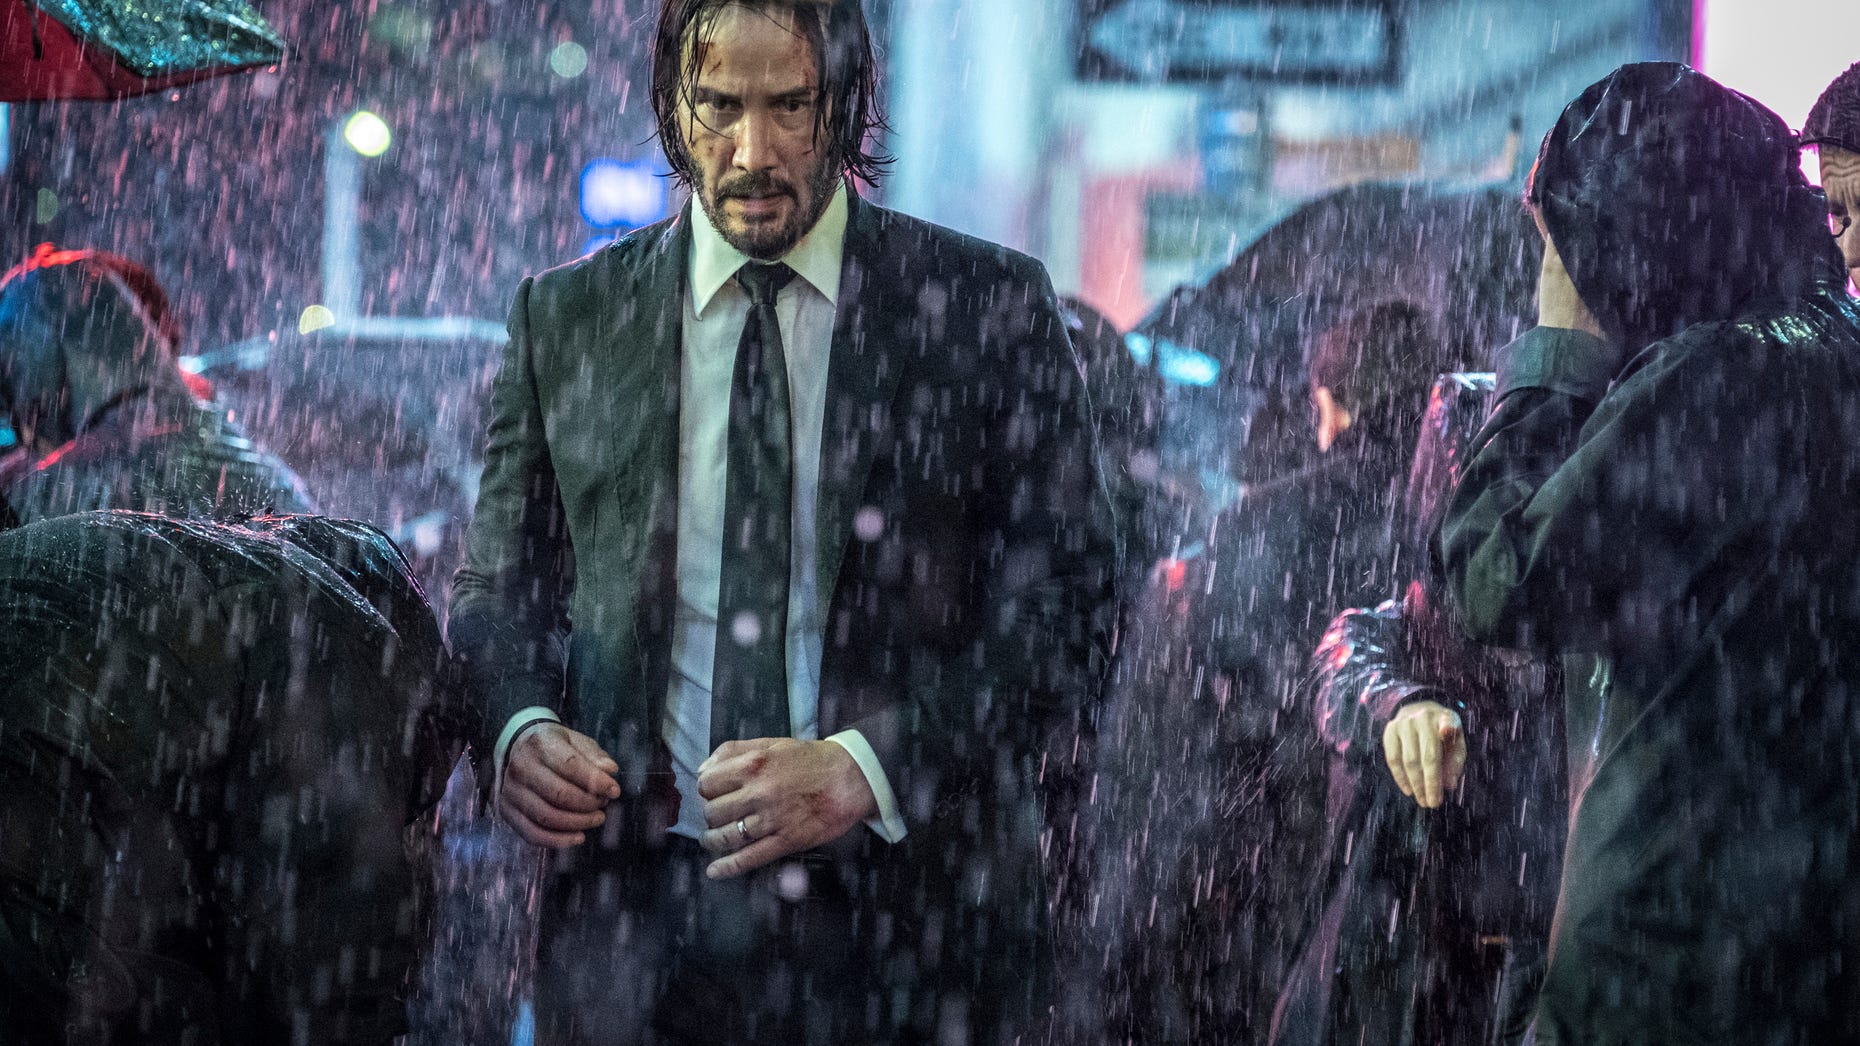 John Wick 4' is coming, it won't be a happy ending for Keanu Reeves